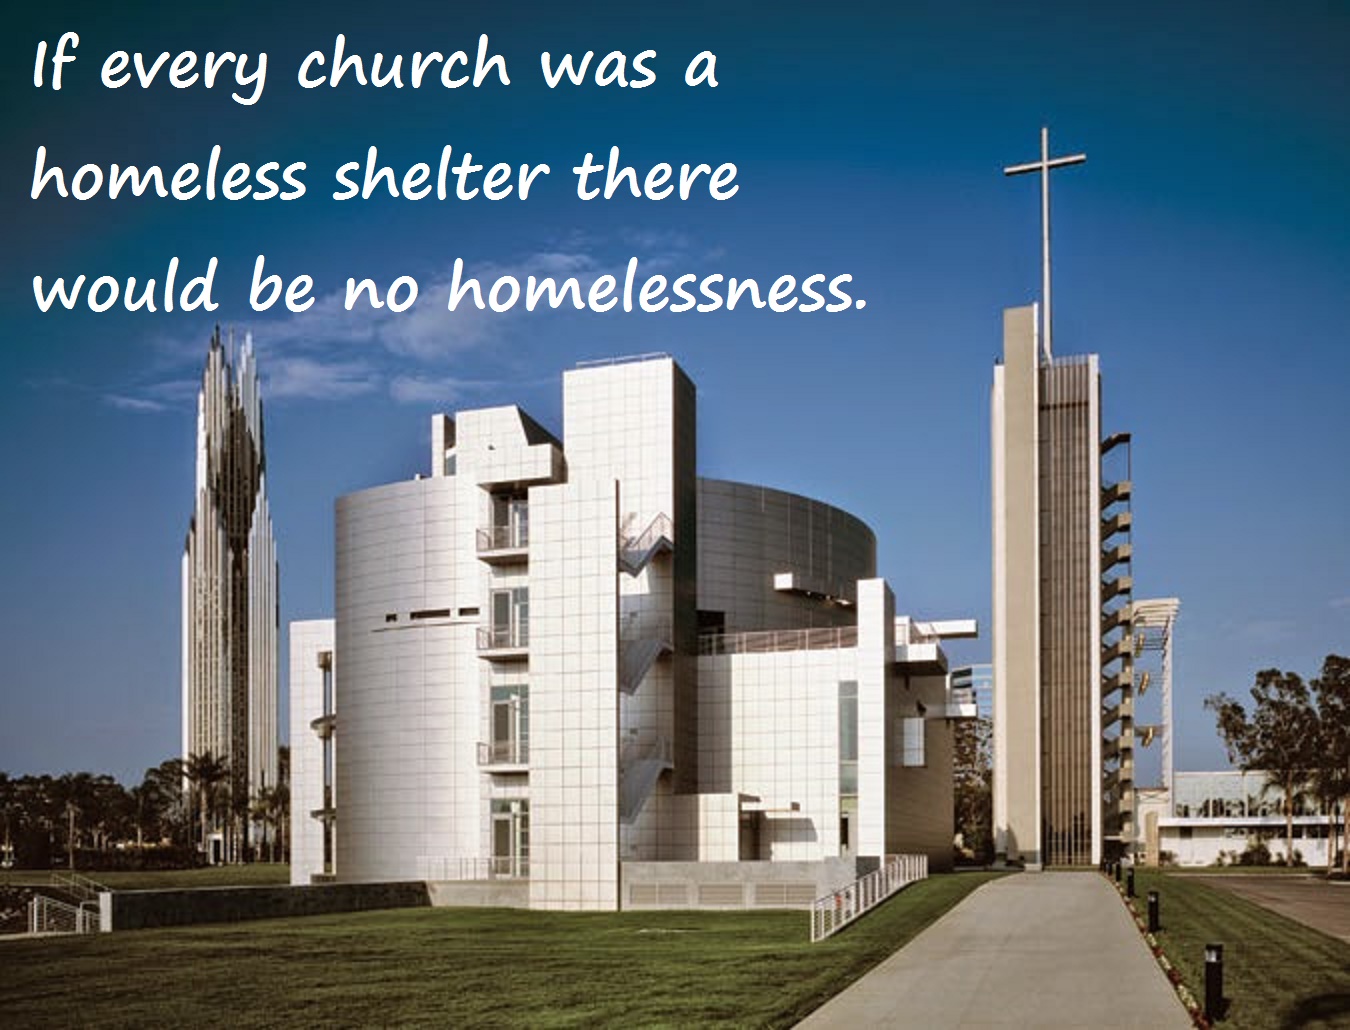 If every church was a homeless shelter there would be no homelessness.